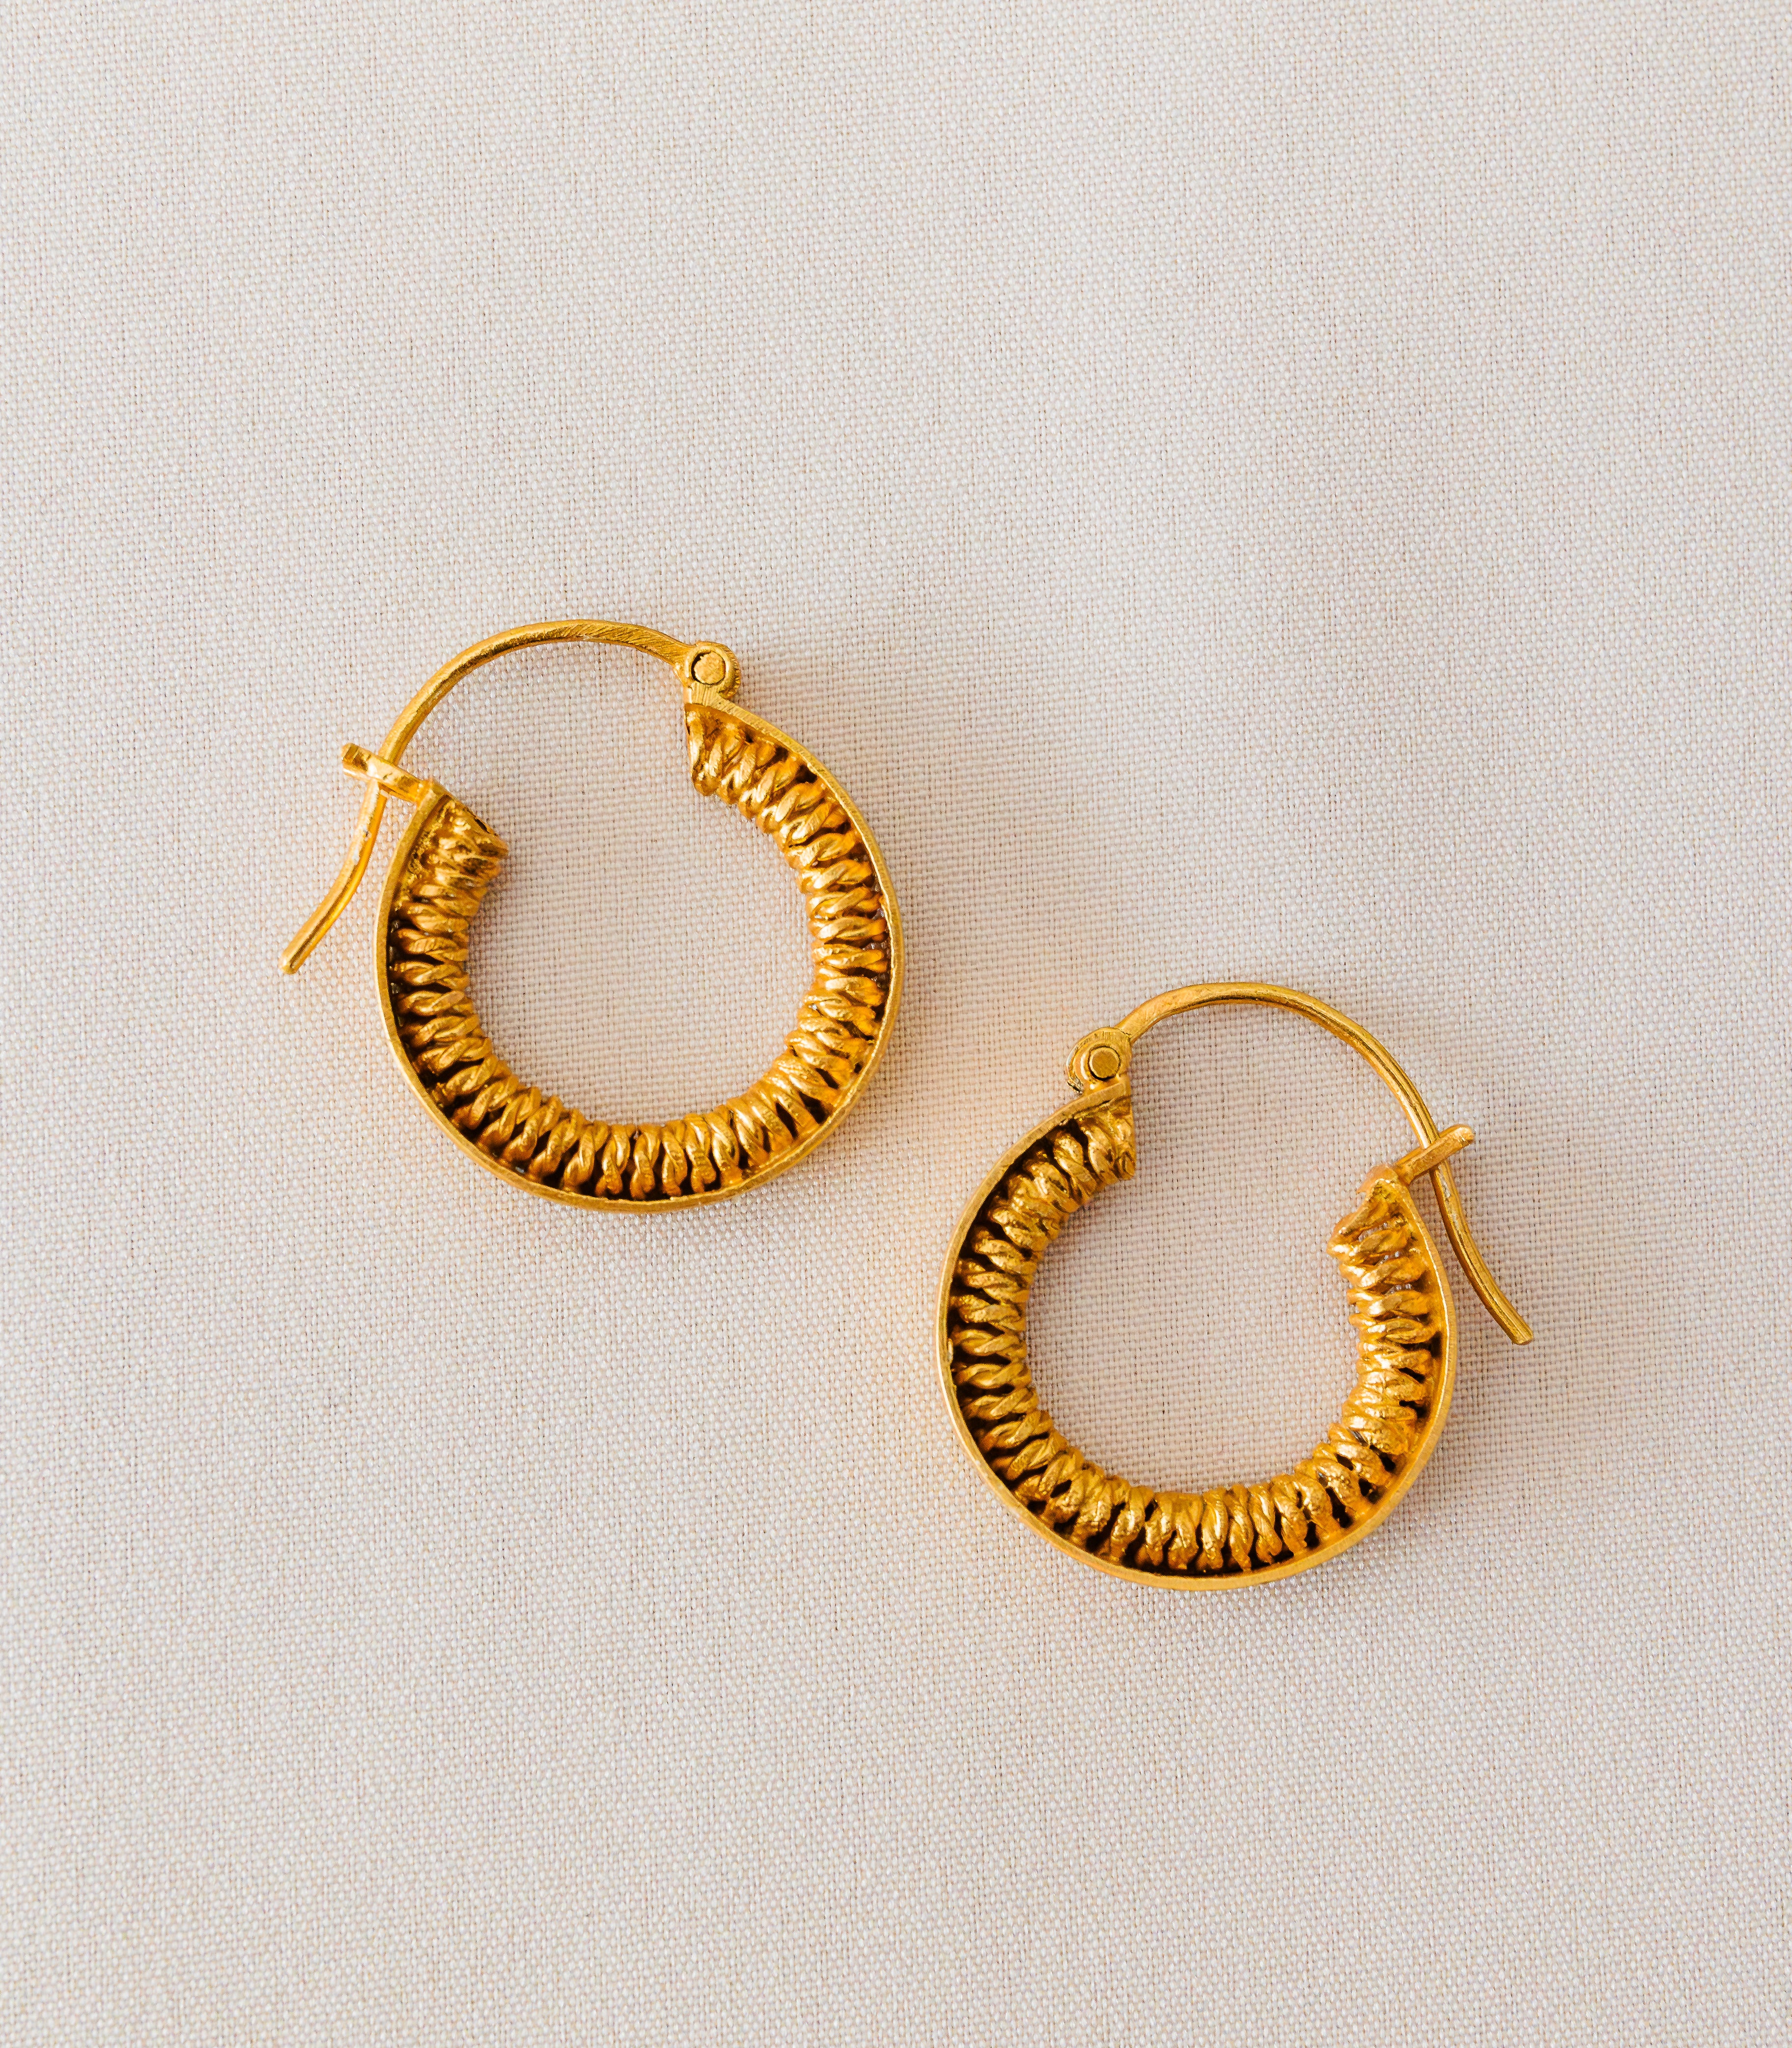 Spiral Hoops - Amami